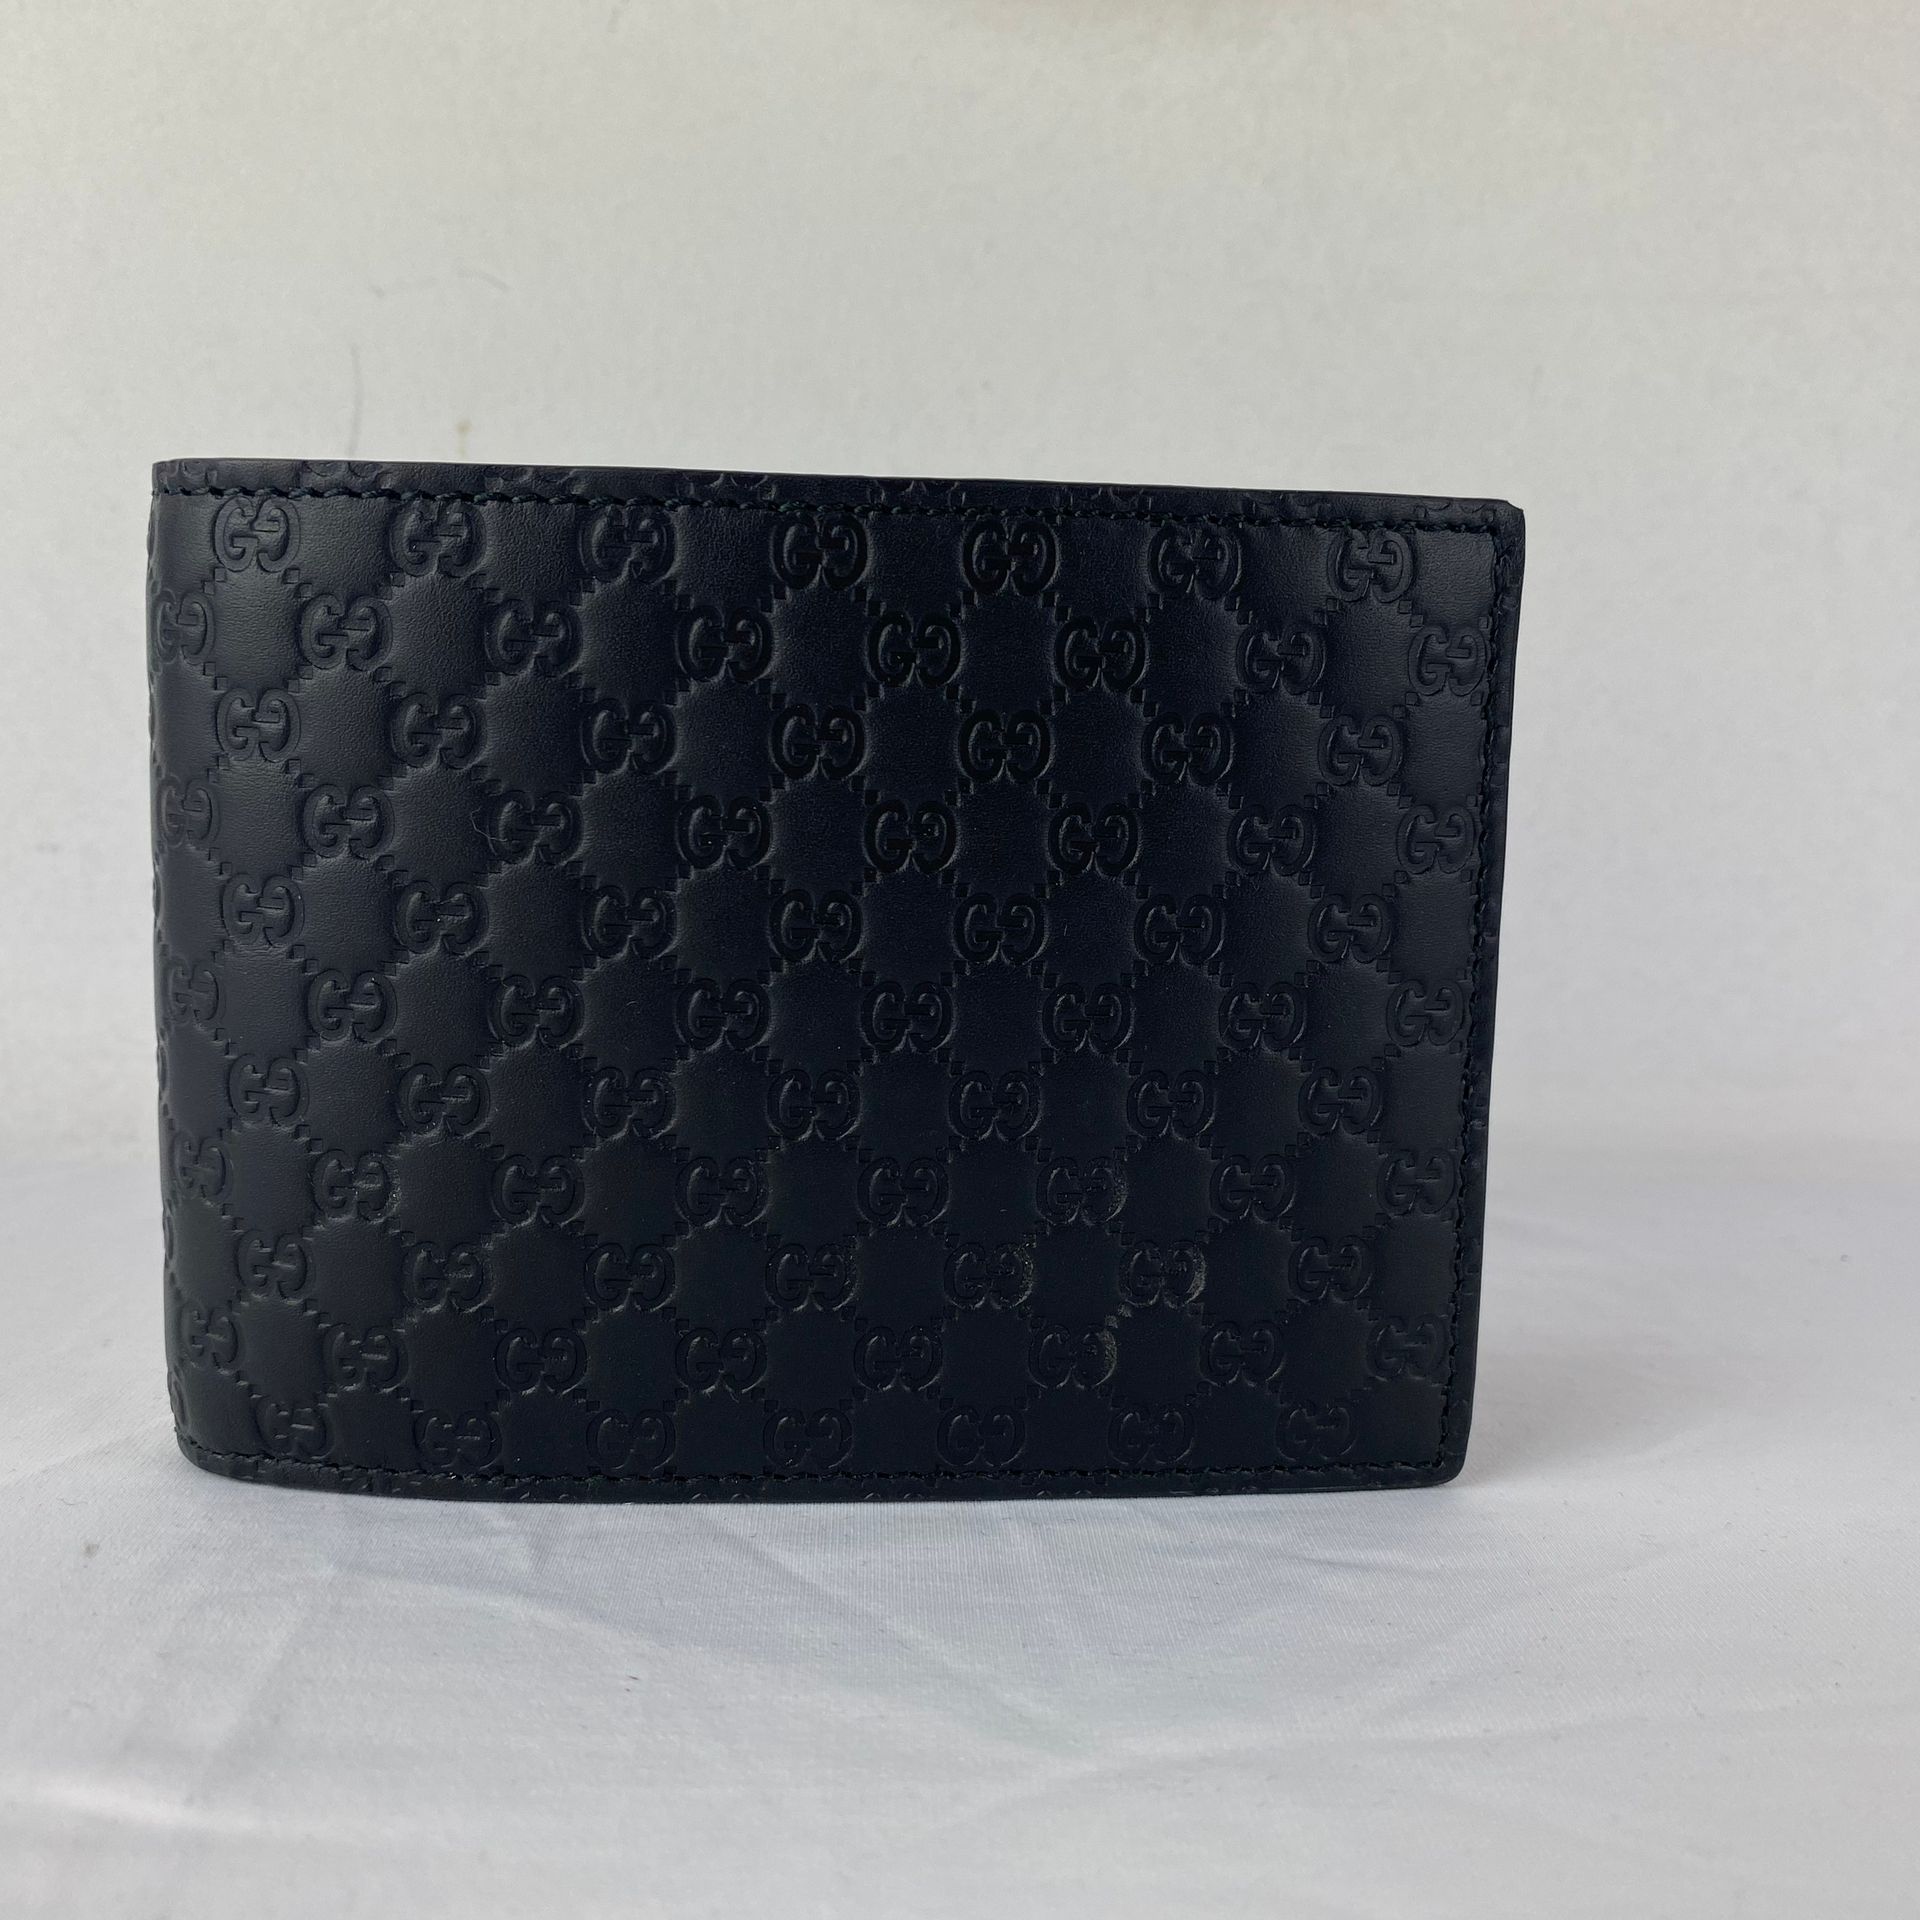 GUCCI A GUCCI Billeteras in black embossed MicroGuggi leather, new with bag